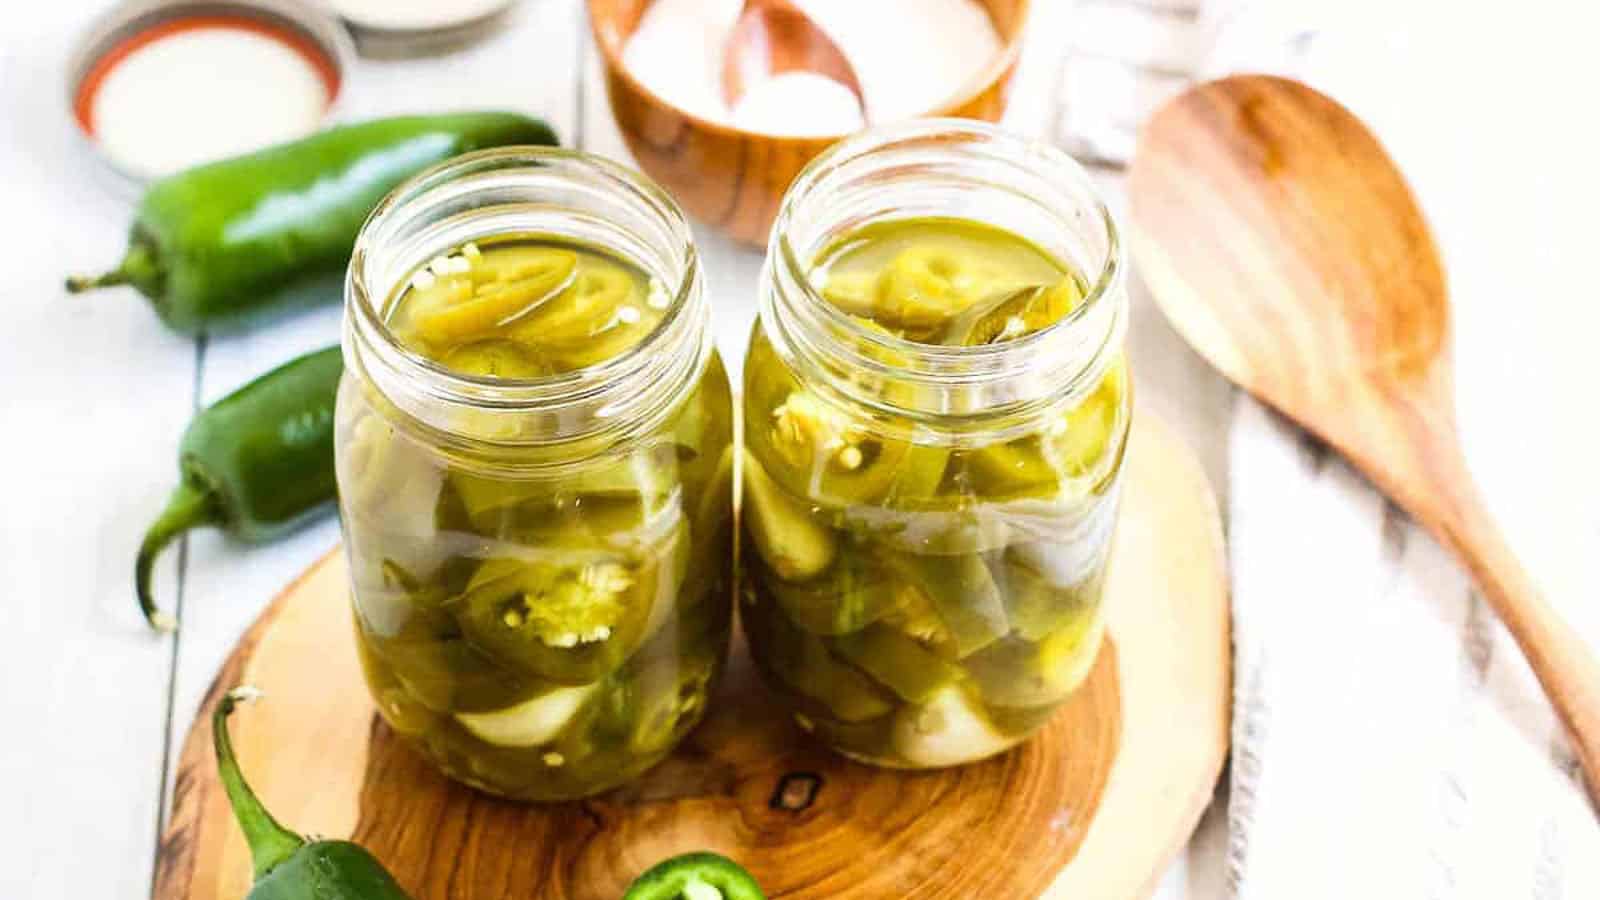 Two canning jars filled with pickled jalapenos on a wooden board with fresh jalapenos on the side.